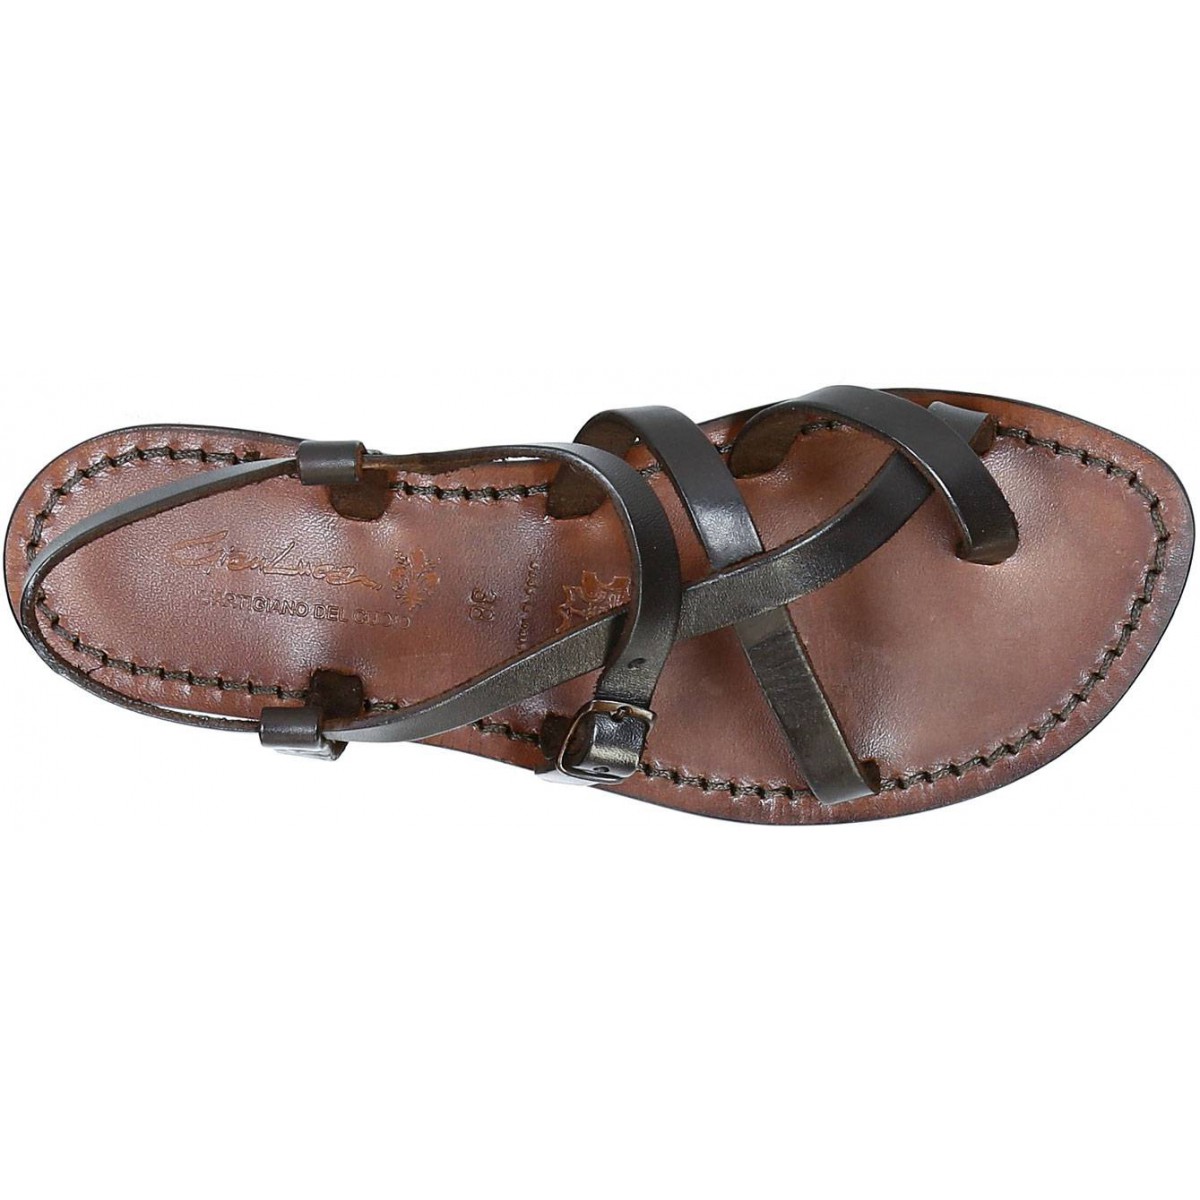 Womens Italian Leather Sandals Dark Brown Hand Made Leather The Leather Craftsmen